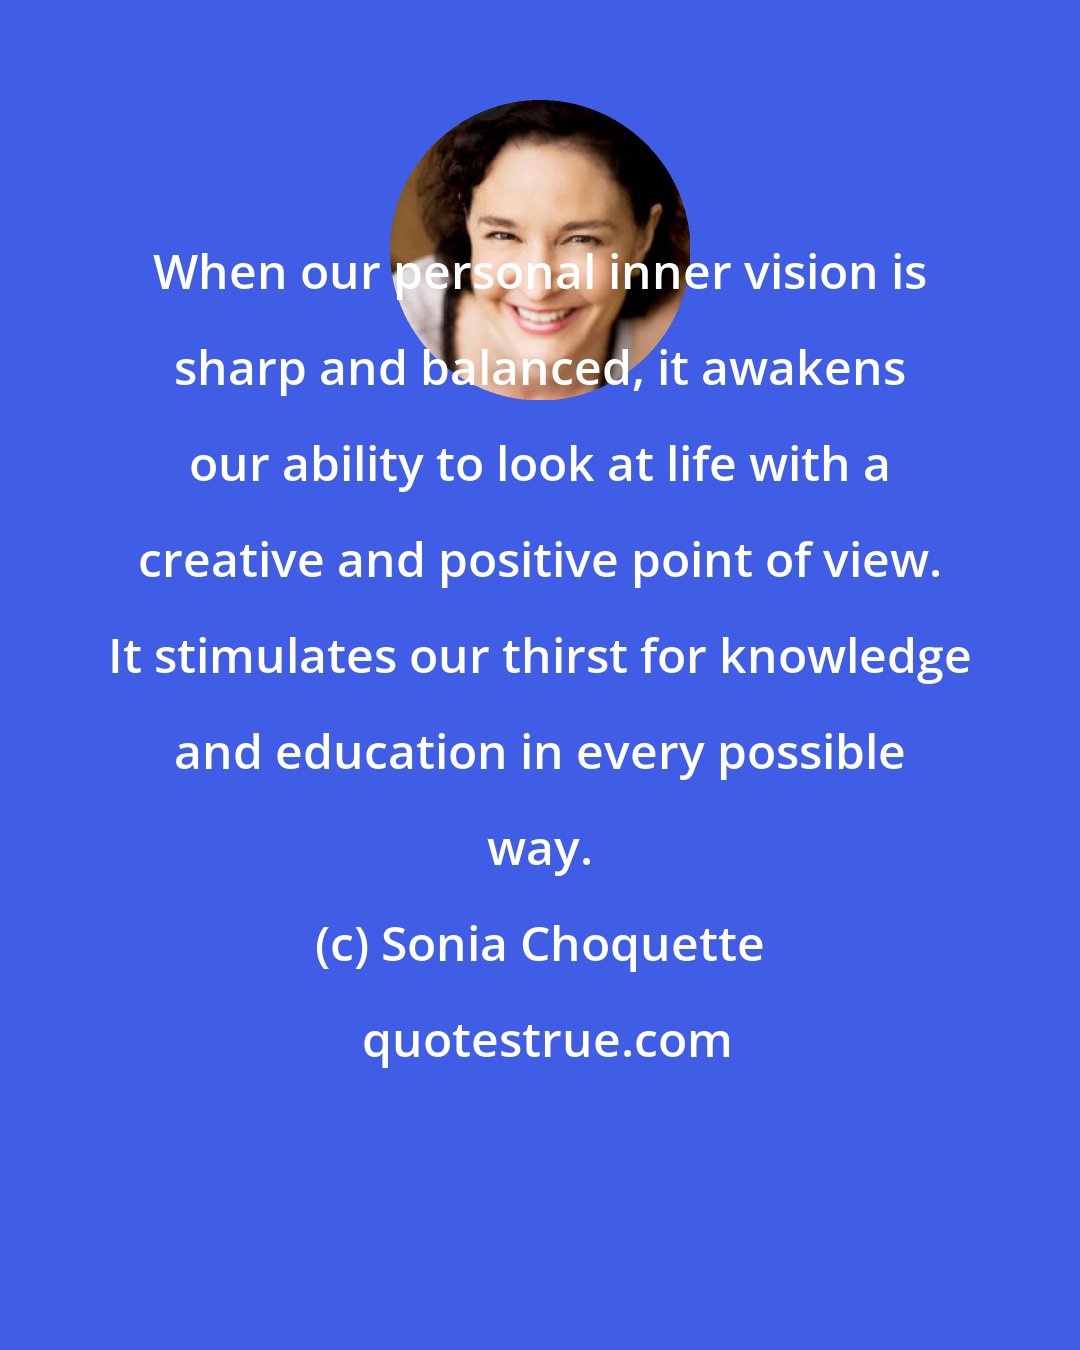 Sonia Choquette: When our personal inner vision is sharp and balanced, it awakens our ability to look at life with a creative and positive point of view. It stimulates our thirst for knowledge and education in every possible way.